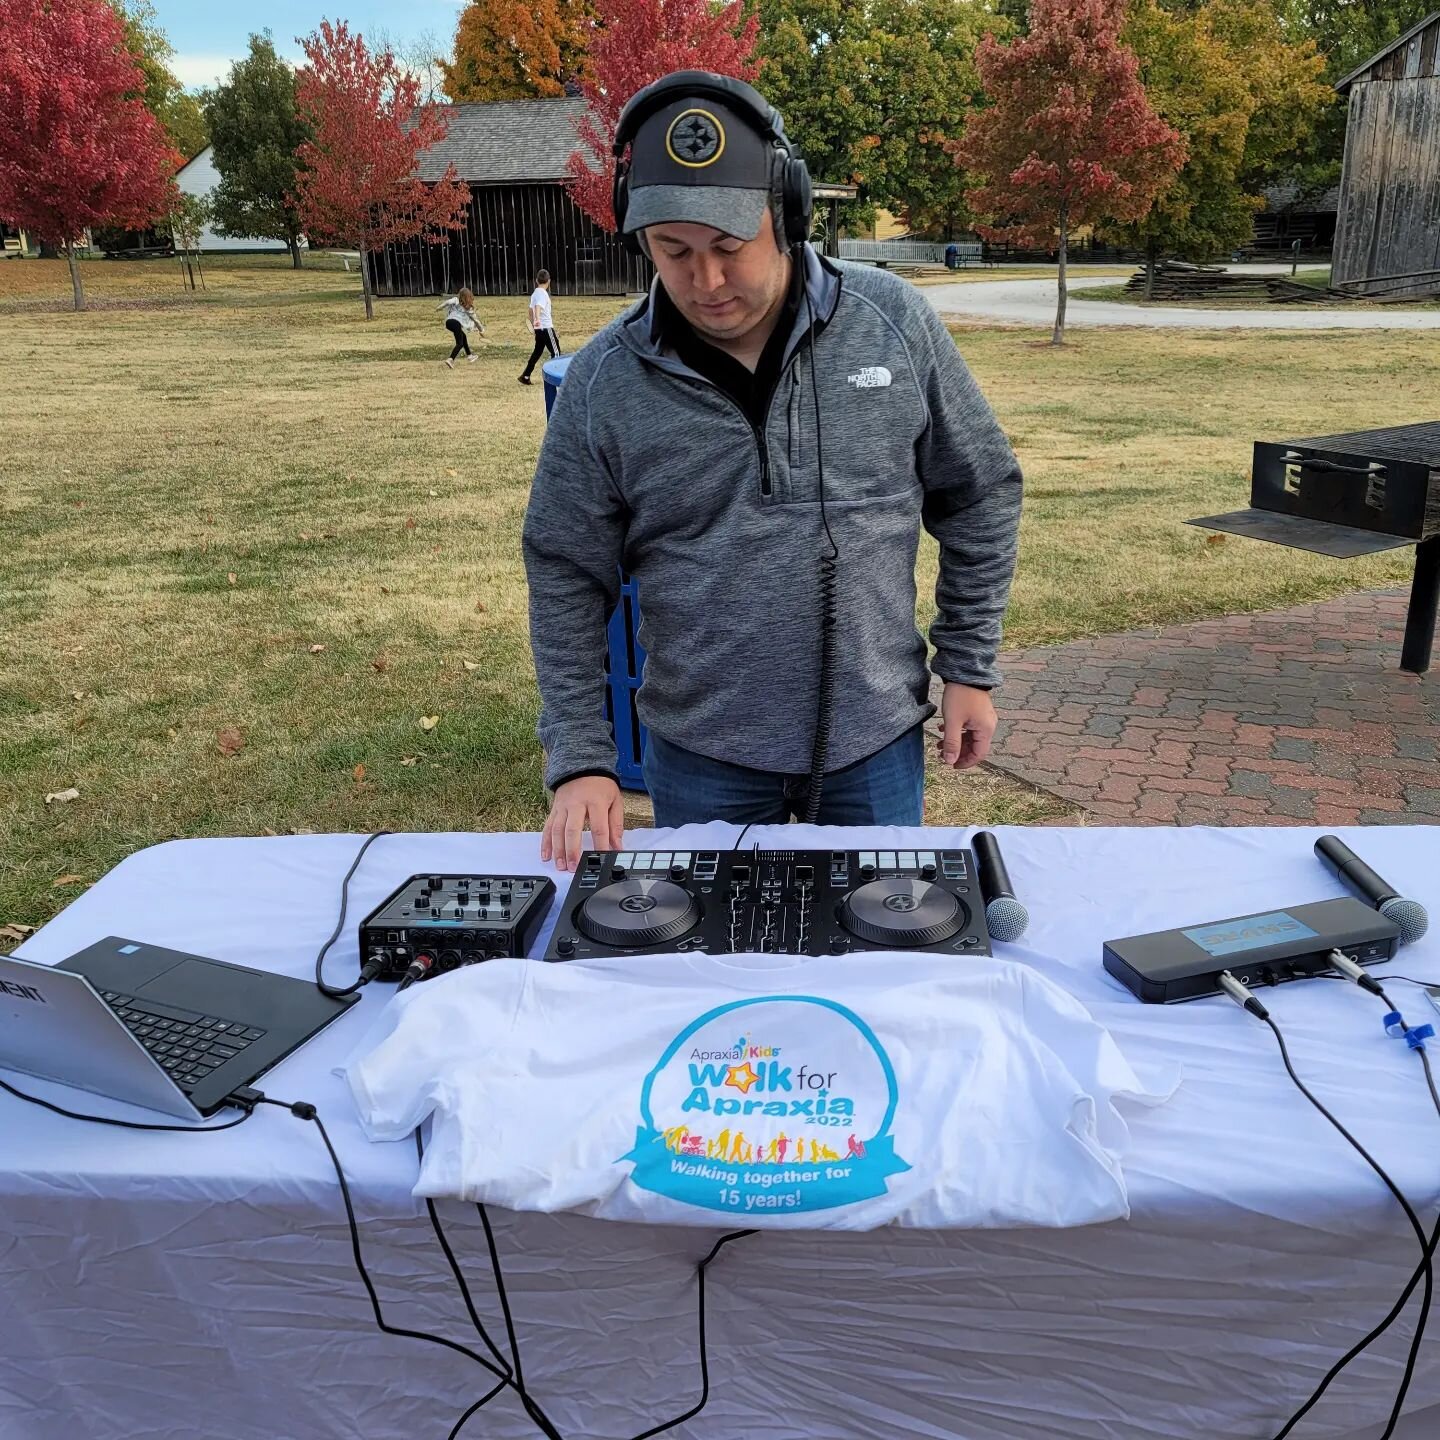 Throwback to 5k Season! Let us know about your DJ needs